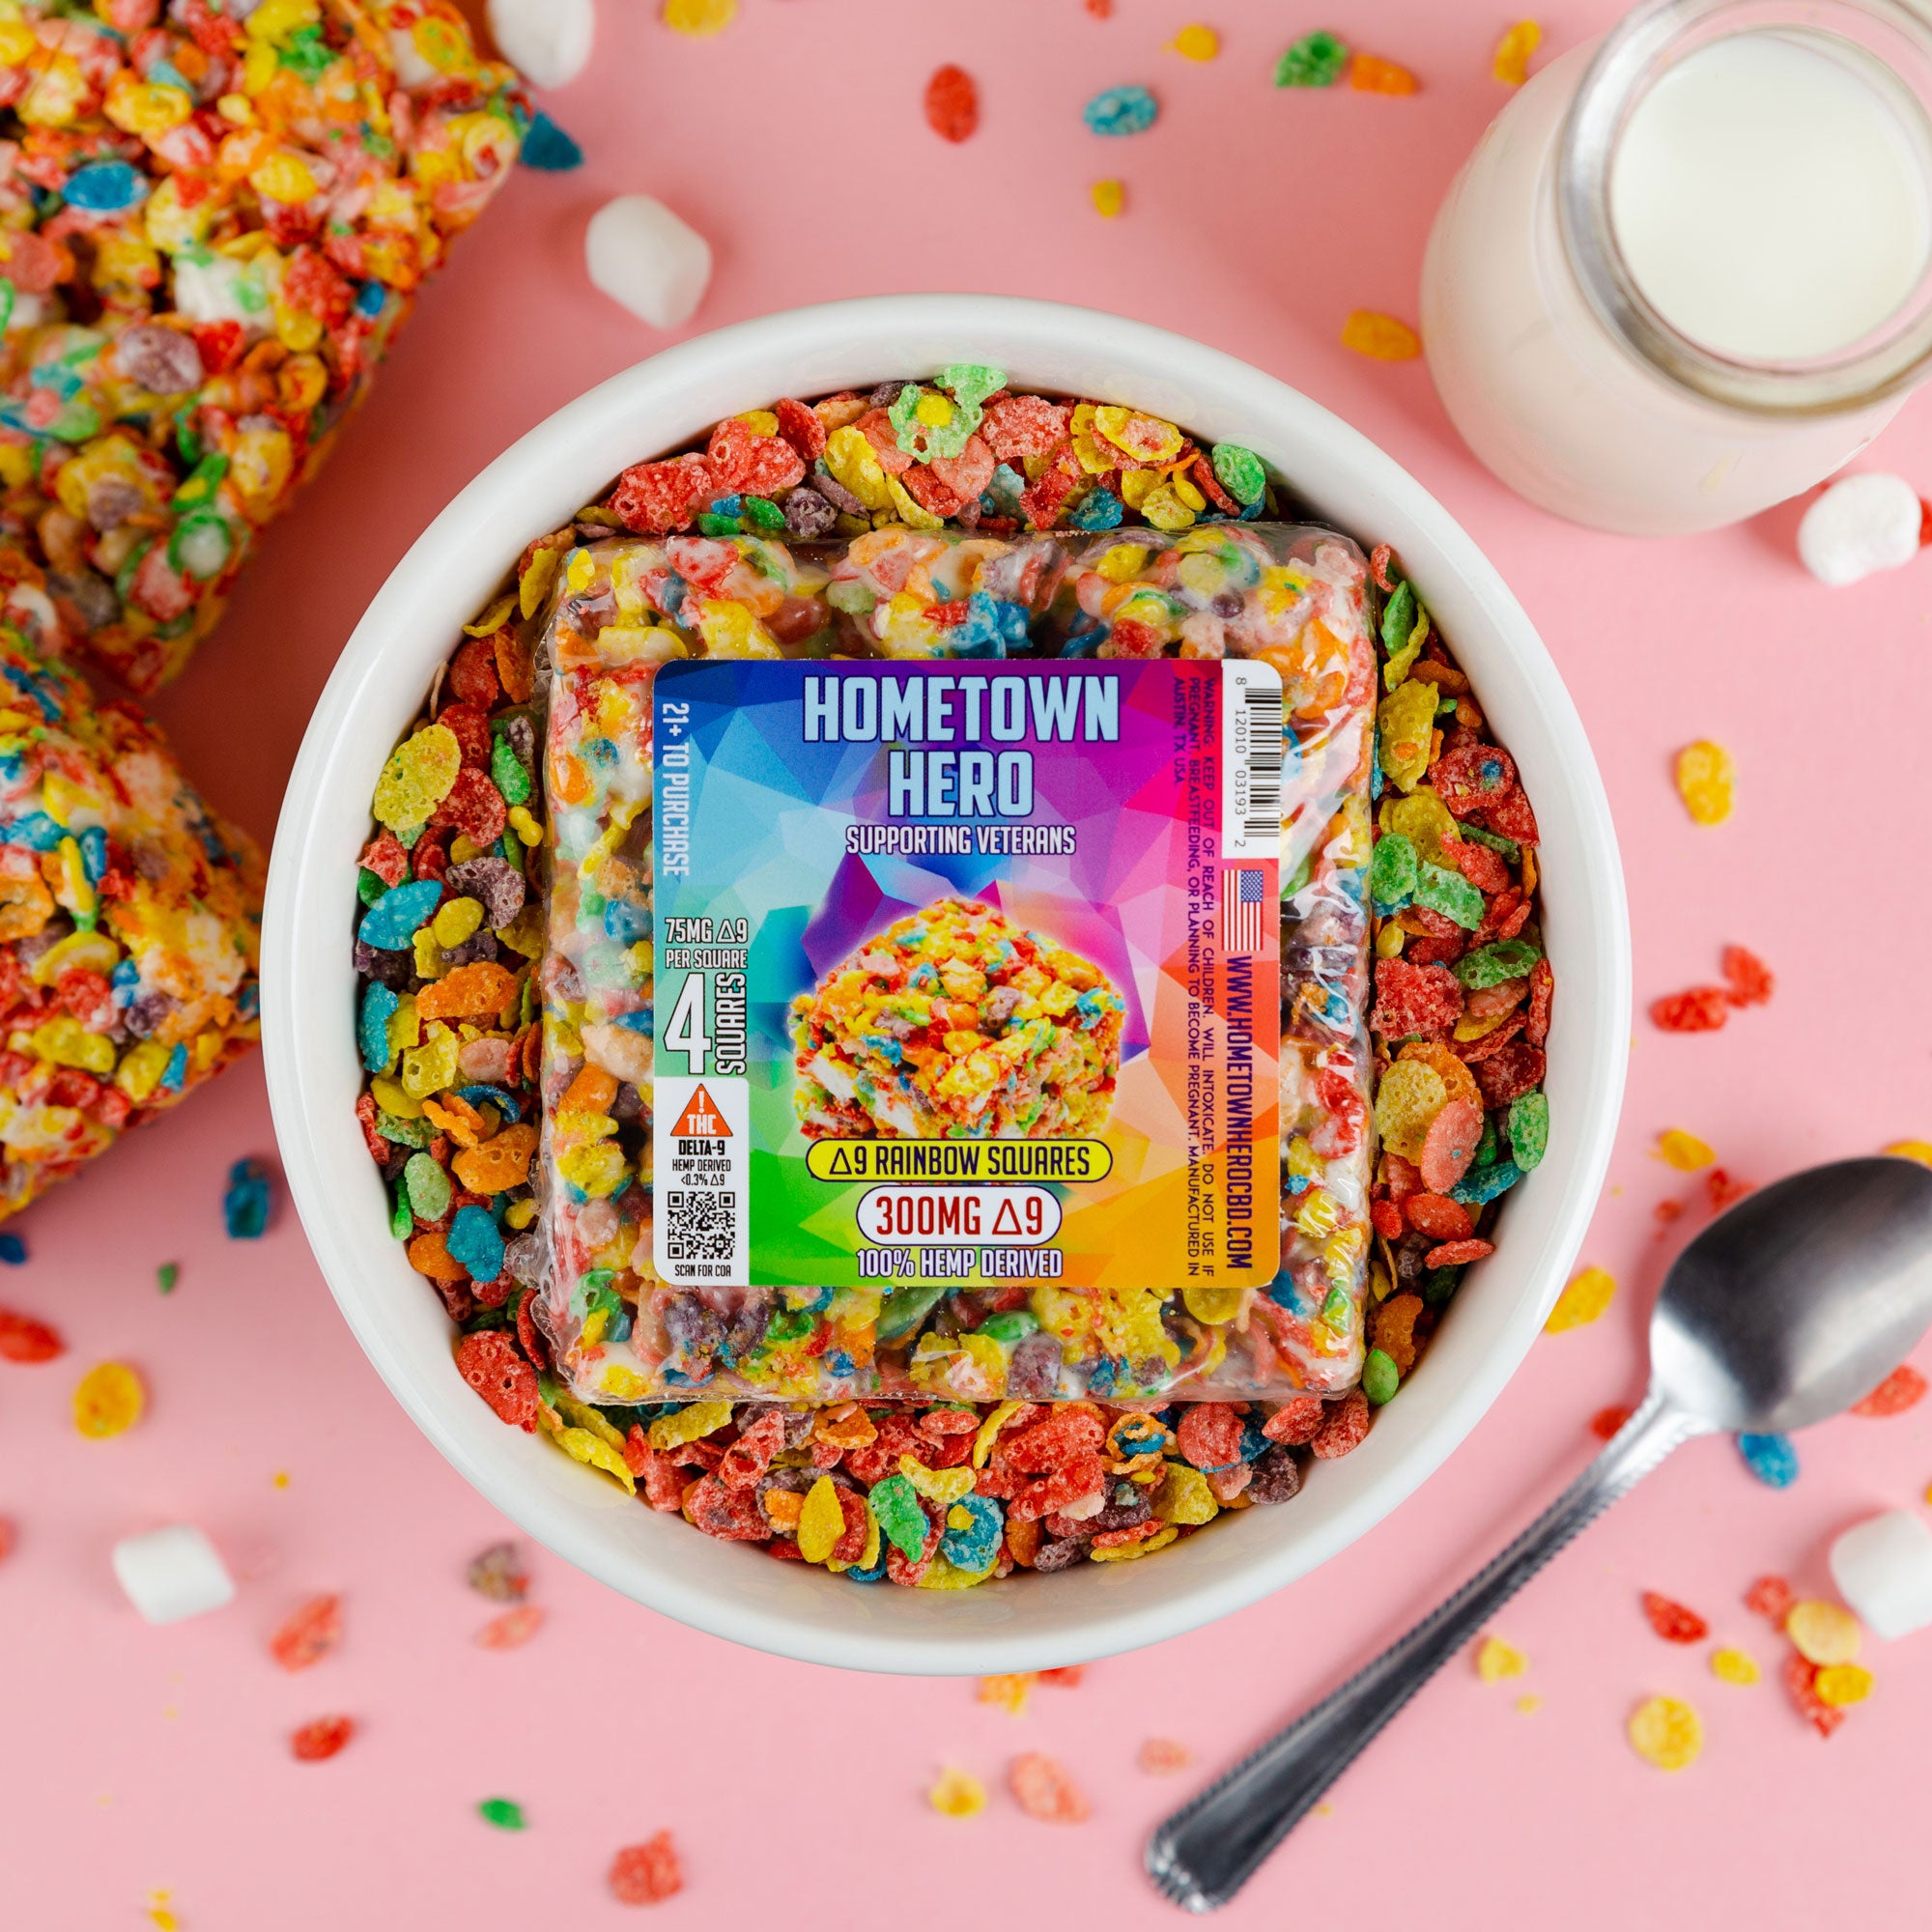 Buy 4 Get 1 FREE Delta-9 THC Rainbow Squares in a cereal bowl